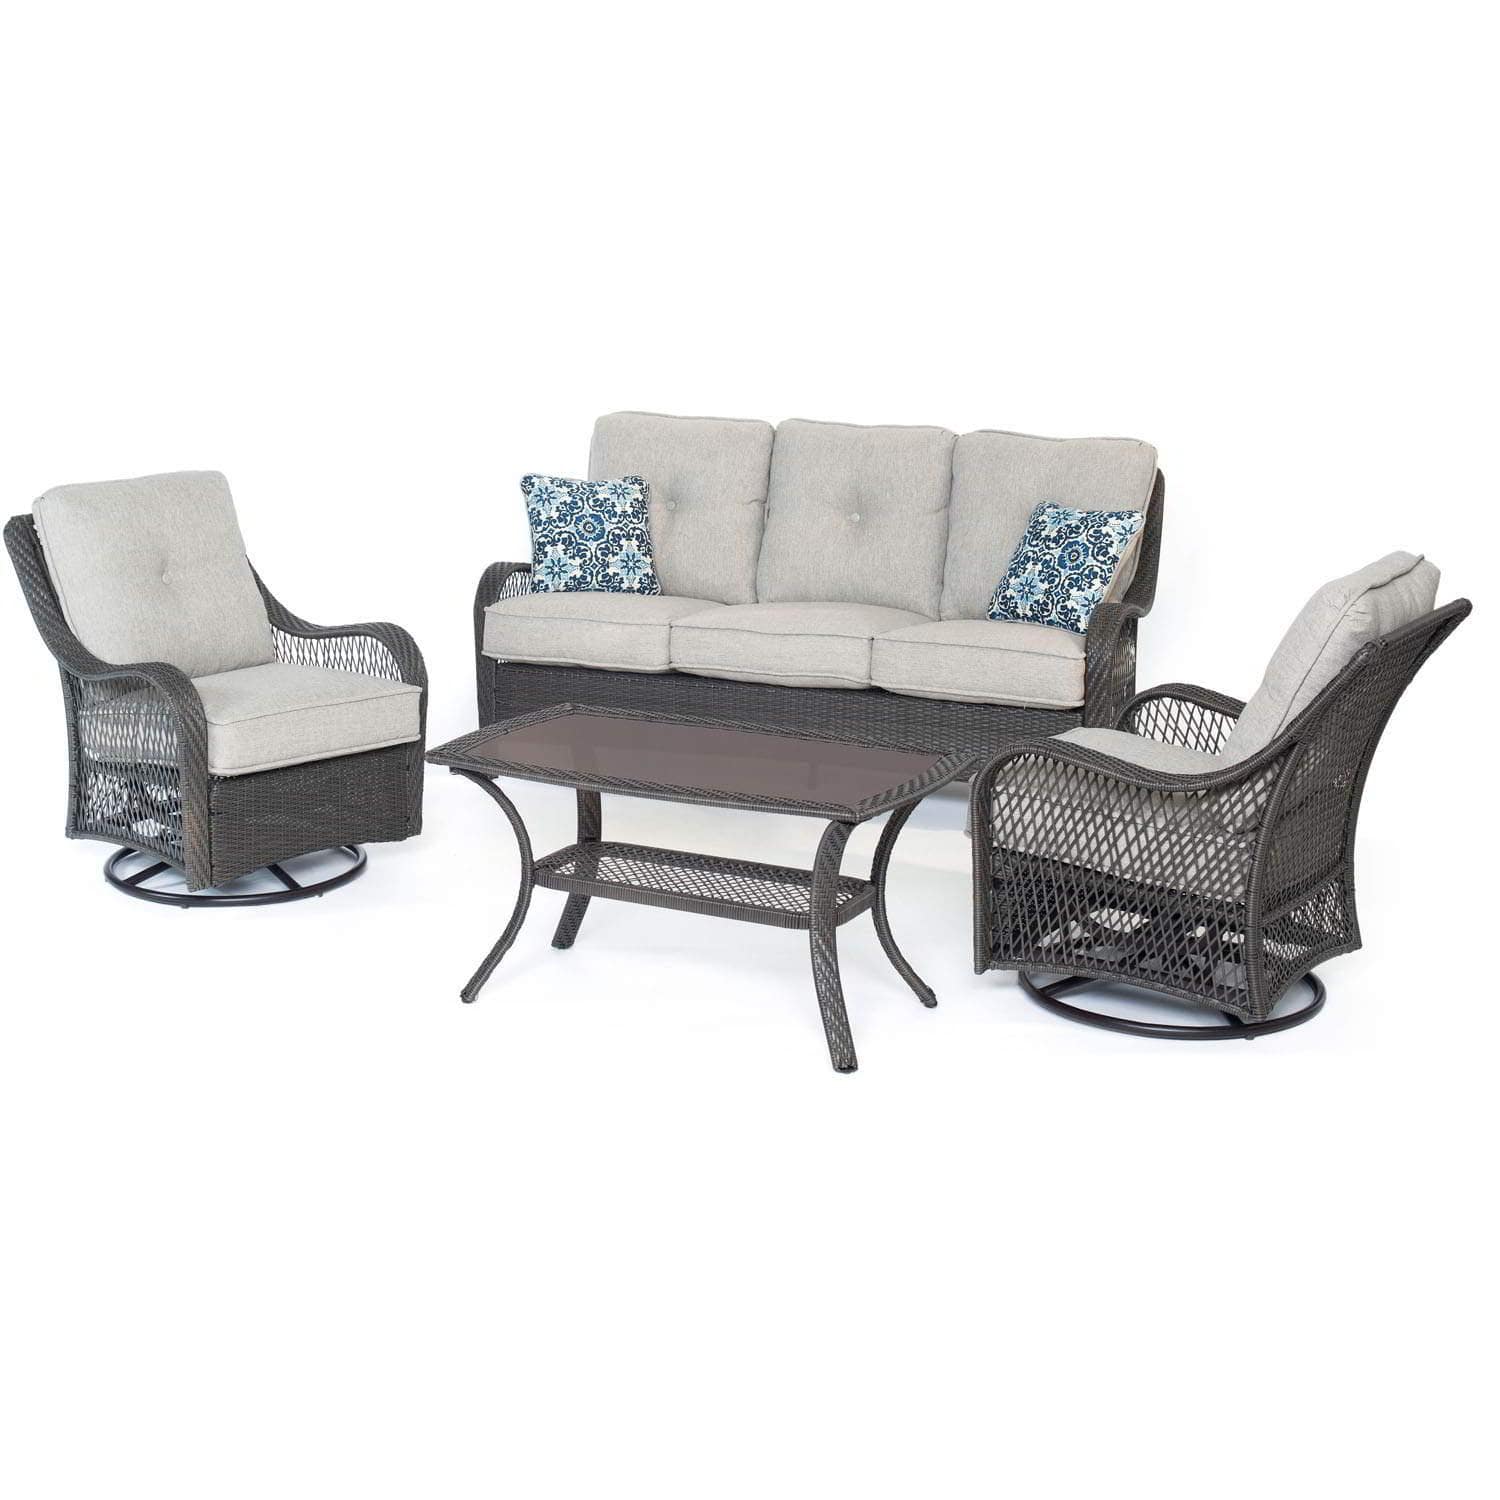 Hanover Conversation Set Hanover - Orleans 4-Piece All-Weather Patio Set in Silver Lining with Gray Weave